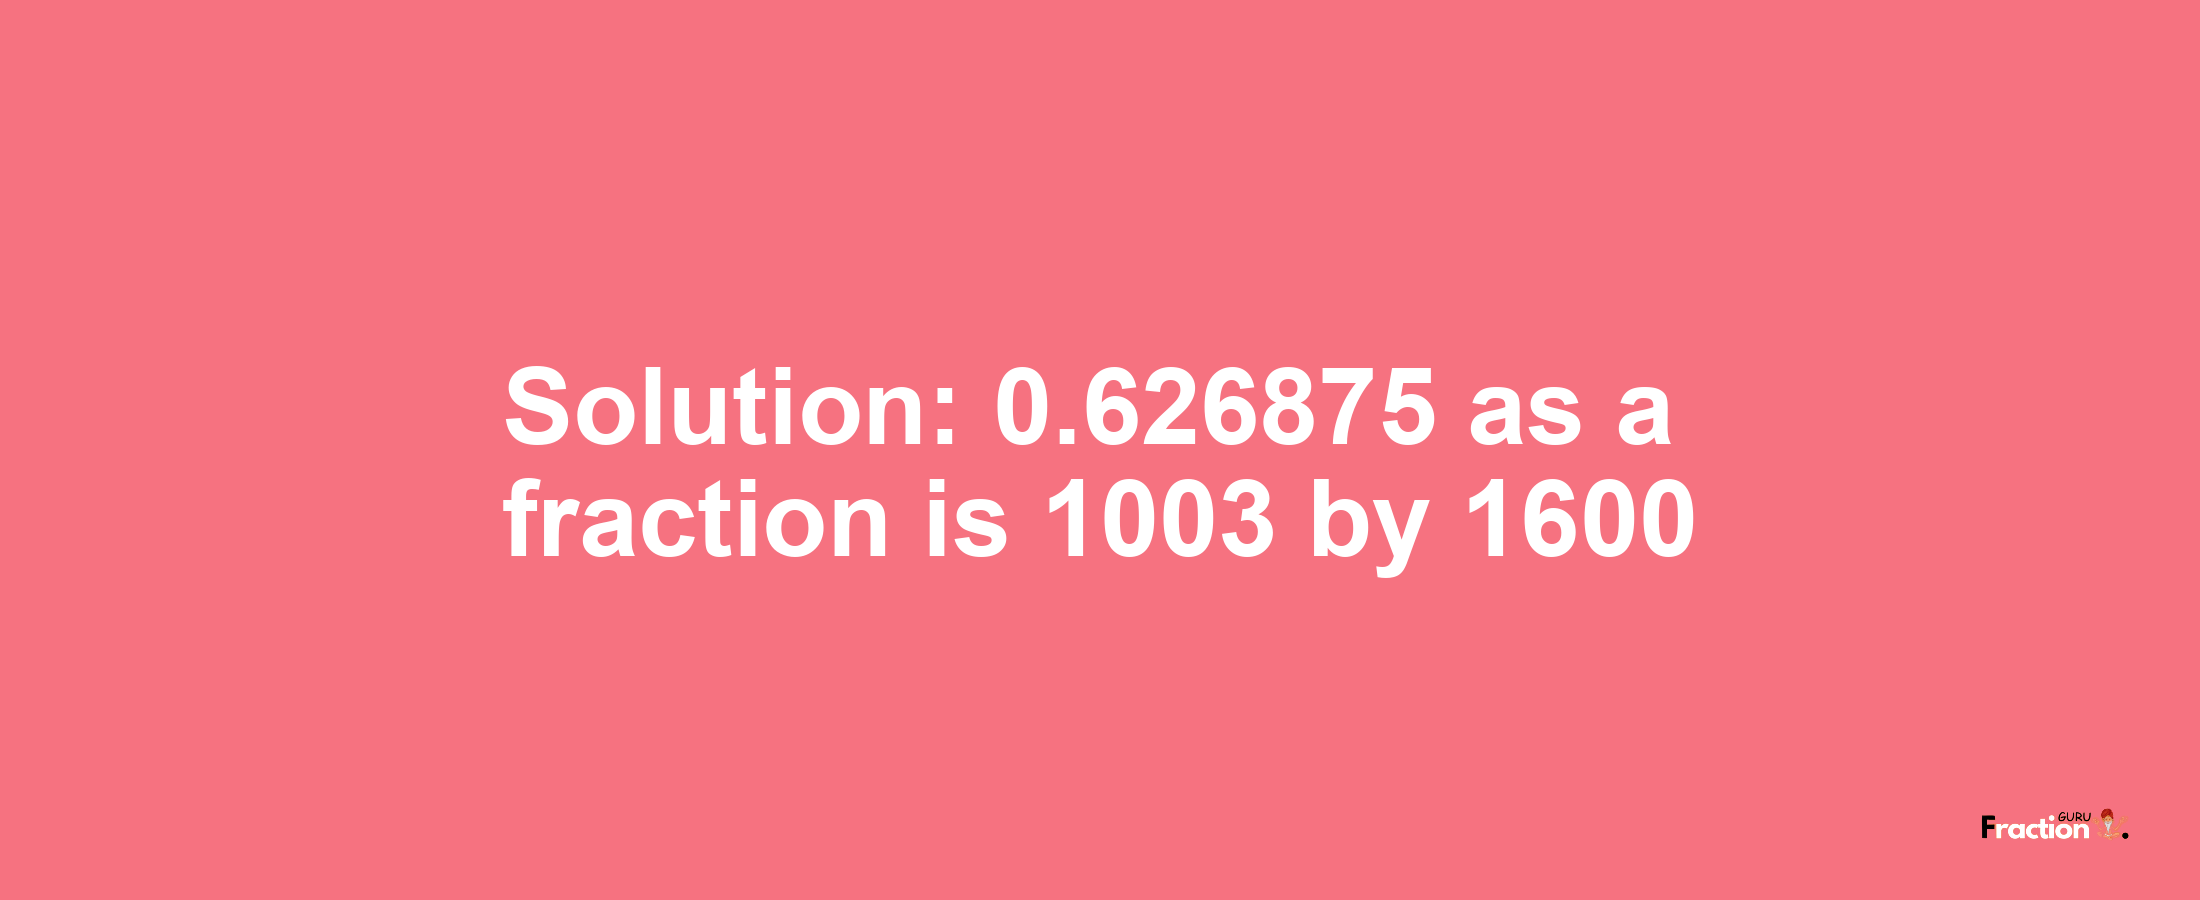 Solution:0.626875 as a fraction is 1003/1600